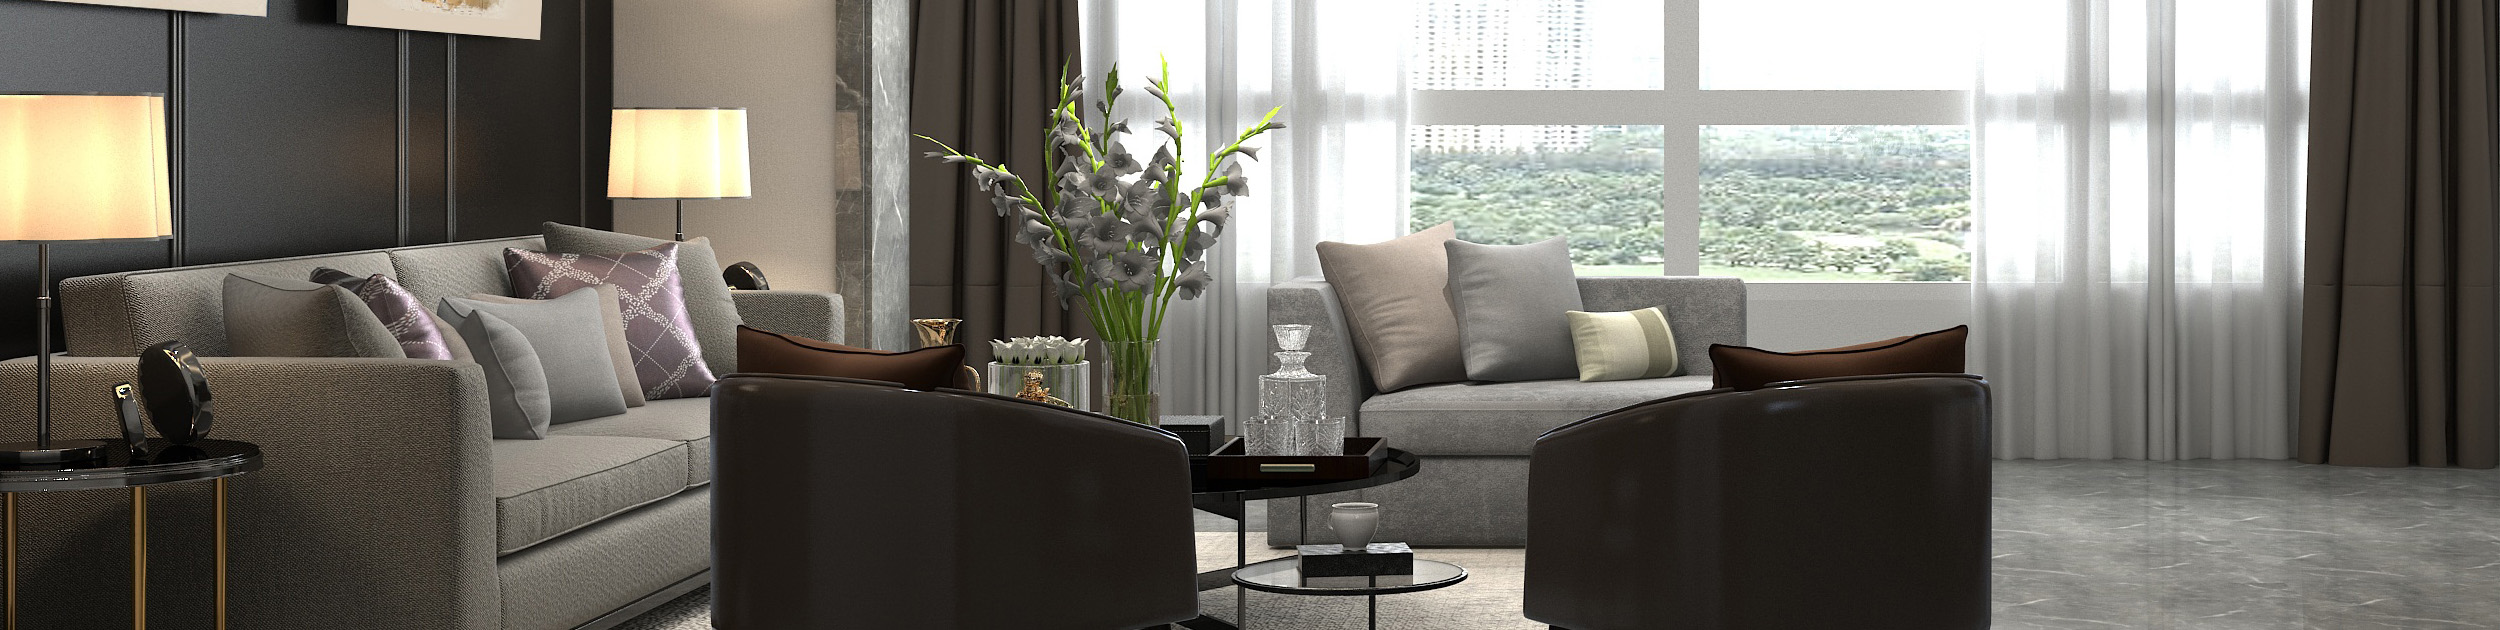 living room filled with gray furniture, lots of lamps and a large window